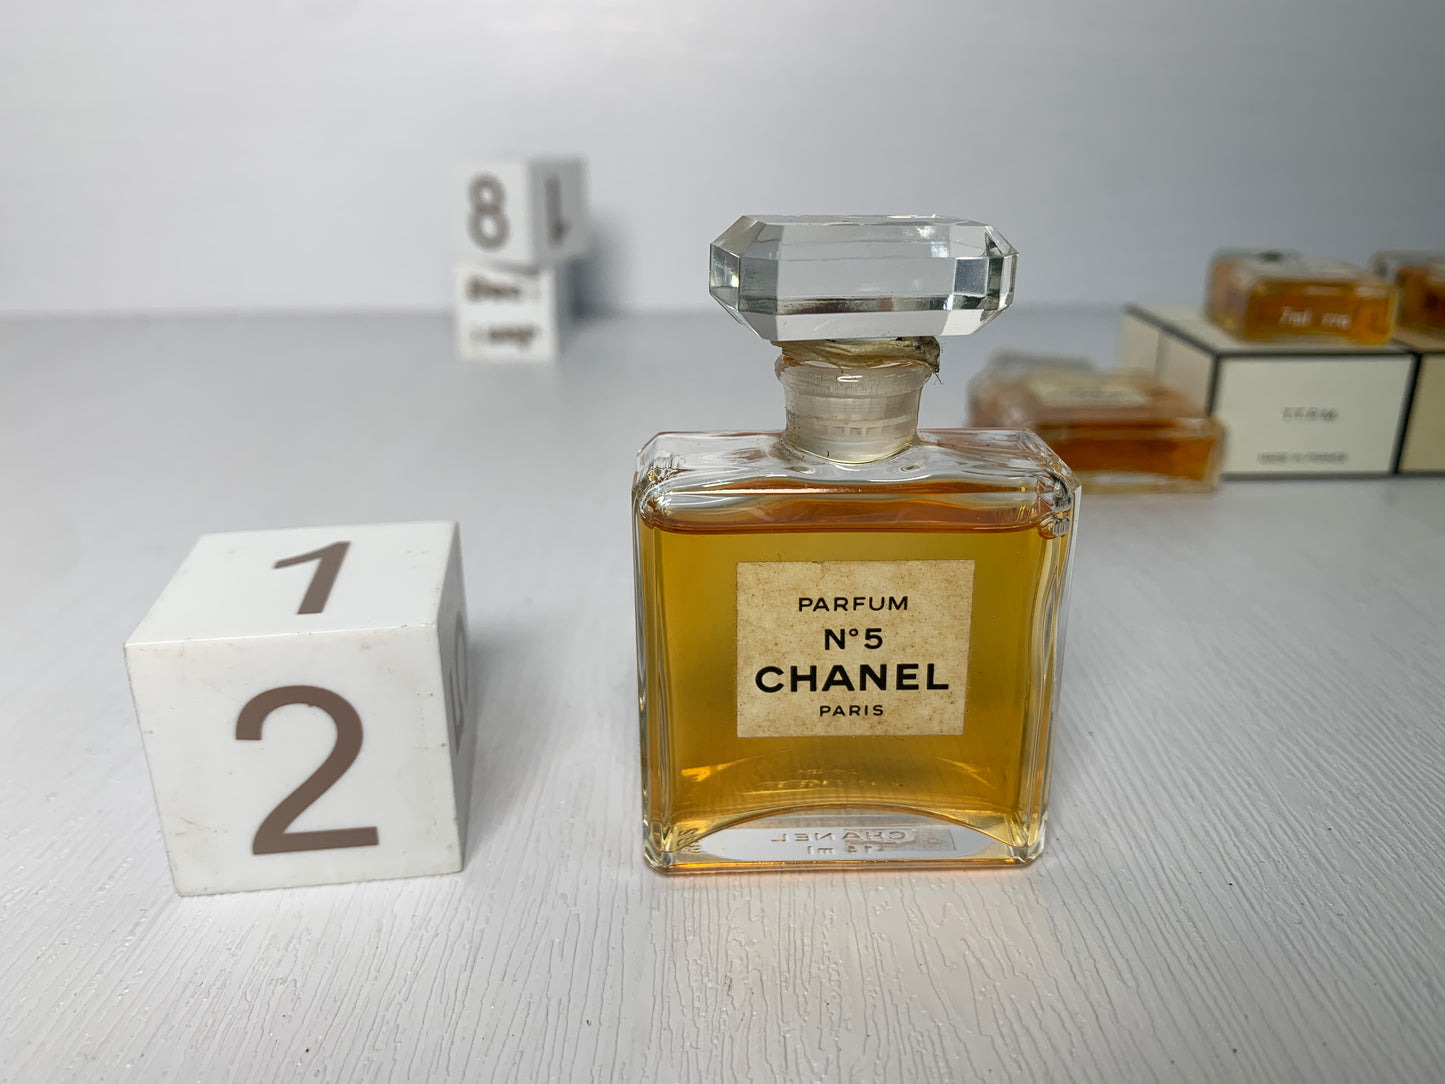 Authentic Discontinued Chanel No. 5 Parfum Perfume 14ml 7ml  70's to 90's Years - 28DEC22